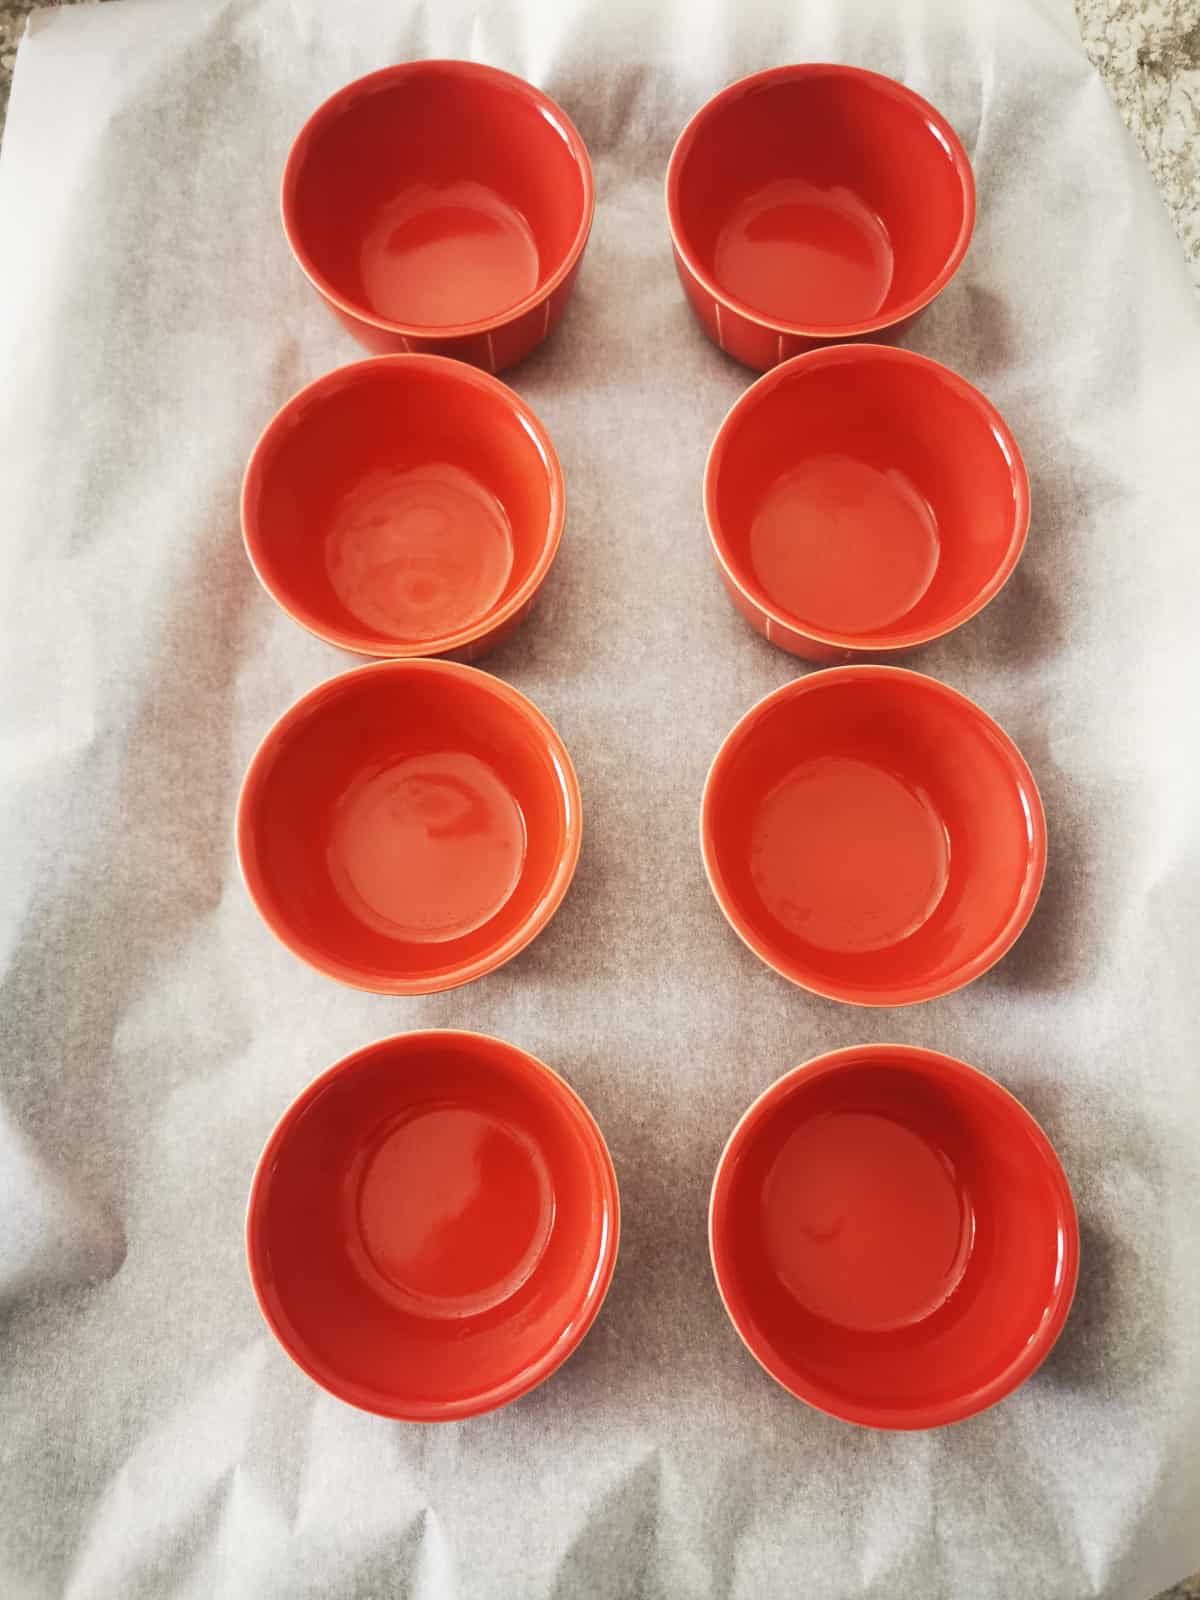 8 red bowls on parchment paper-lined baking dish